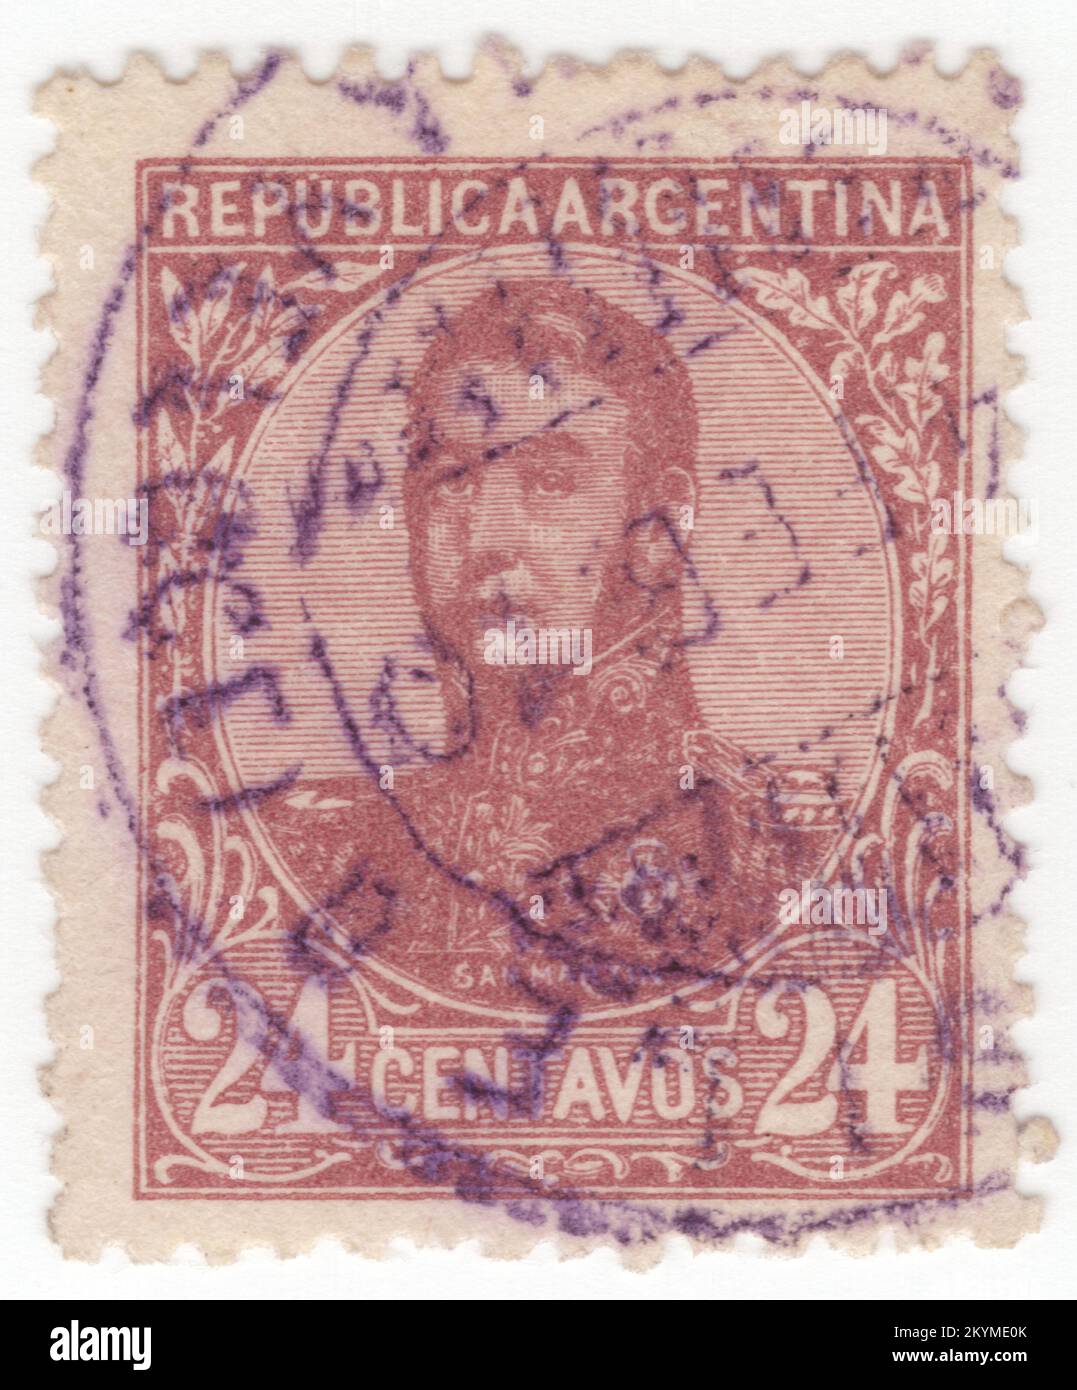 ARGENTINA - 1908: 24 centavos red-brown postage stamp depicting portrait of José de San Martín (Jose Francisco de San Martín y Matorras), known as the Liberator of Argentina, Chile and Peru. Argentine general and the primary leader of the southern and central parts of South America's successful struggle for independence from the Spanish Empire who served as the Protector of Peru. Born in Yapeyú, Corrientes, in modern-day Argentina, he left the Viceroyalty of the Río de la Plata at the early age of seven to study in Málaga, Spain Stock Photo